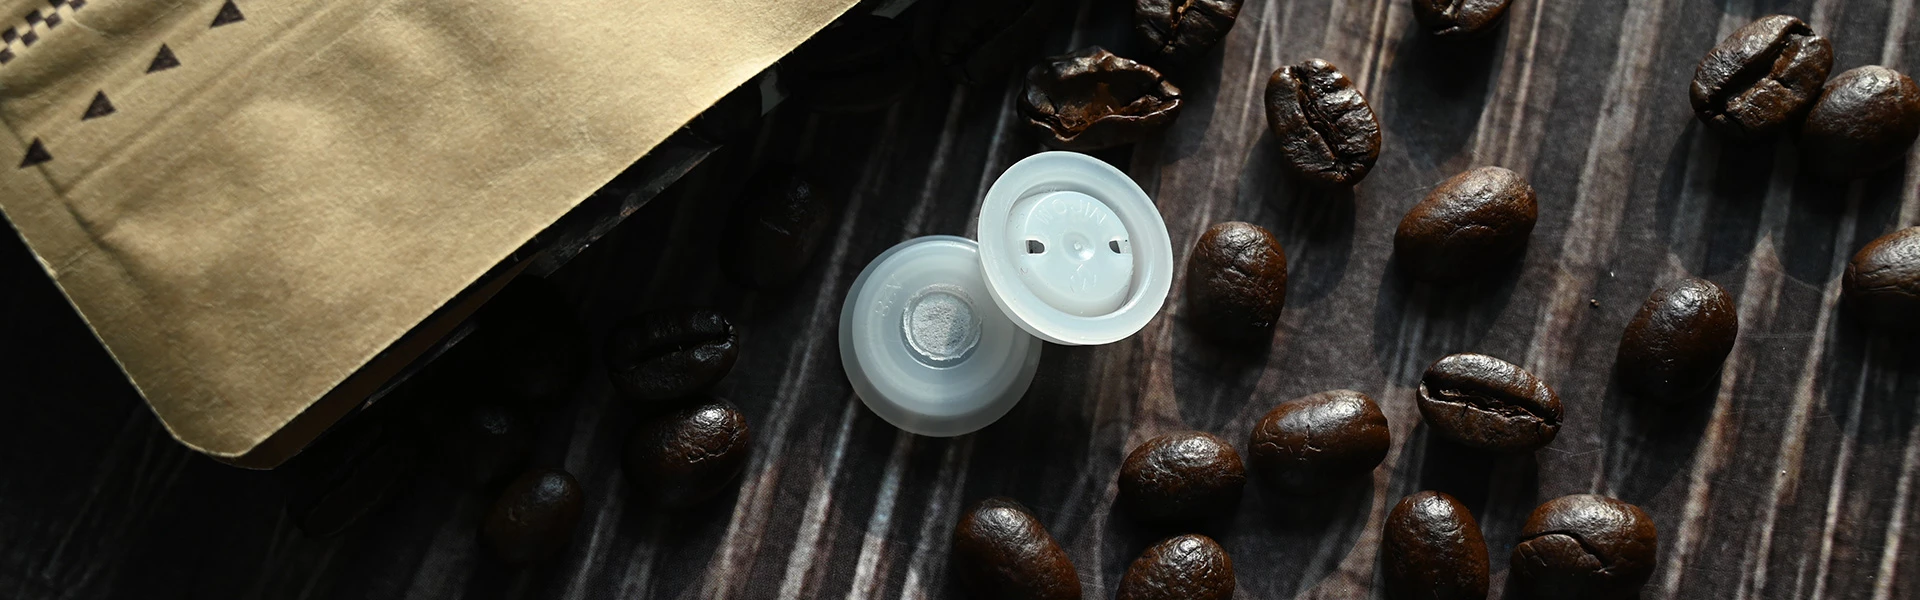 To endow the coffee valve a new environmental mission